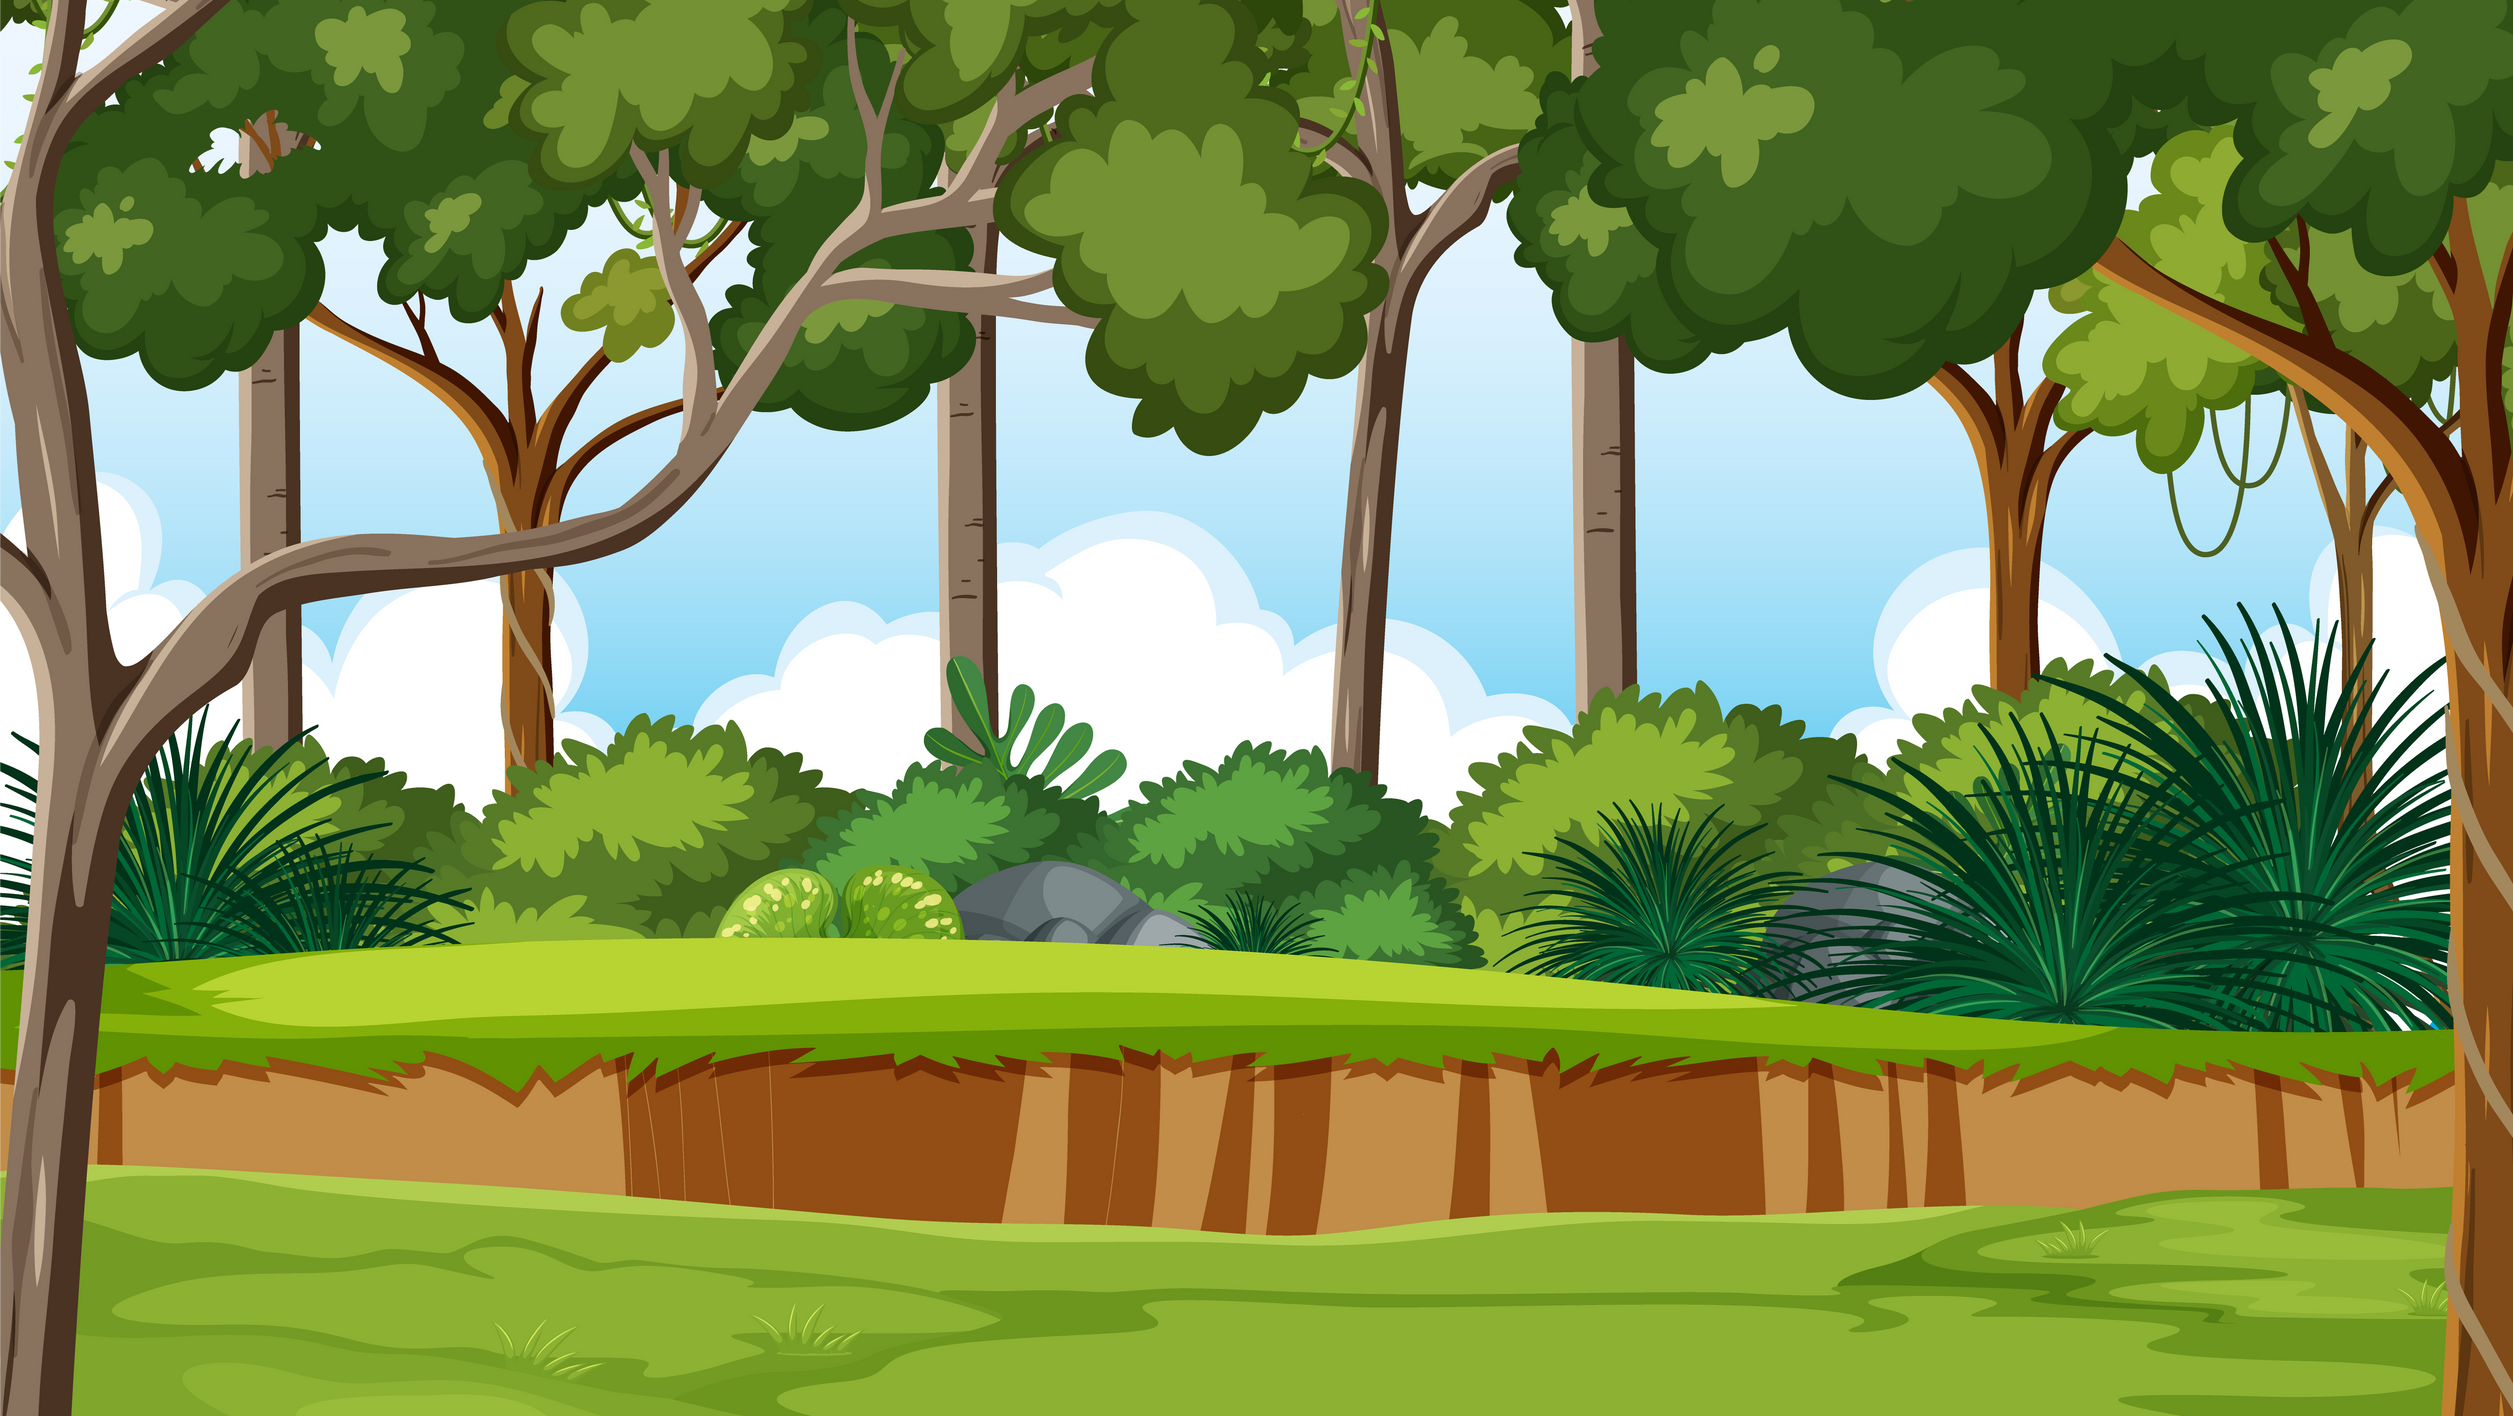 Jungle Environment Background in Cartoon Style